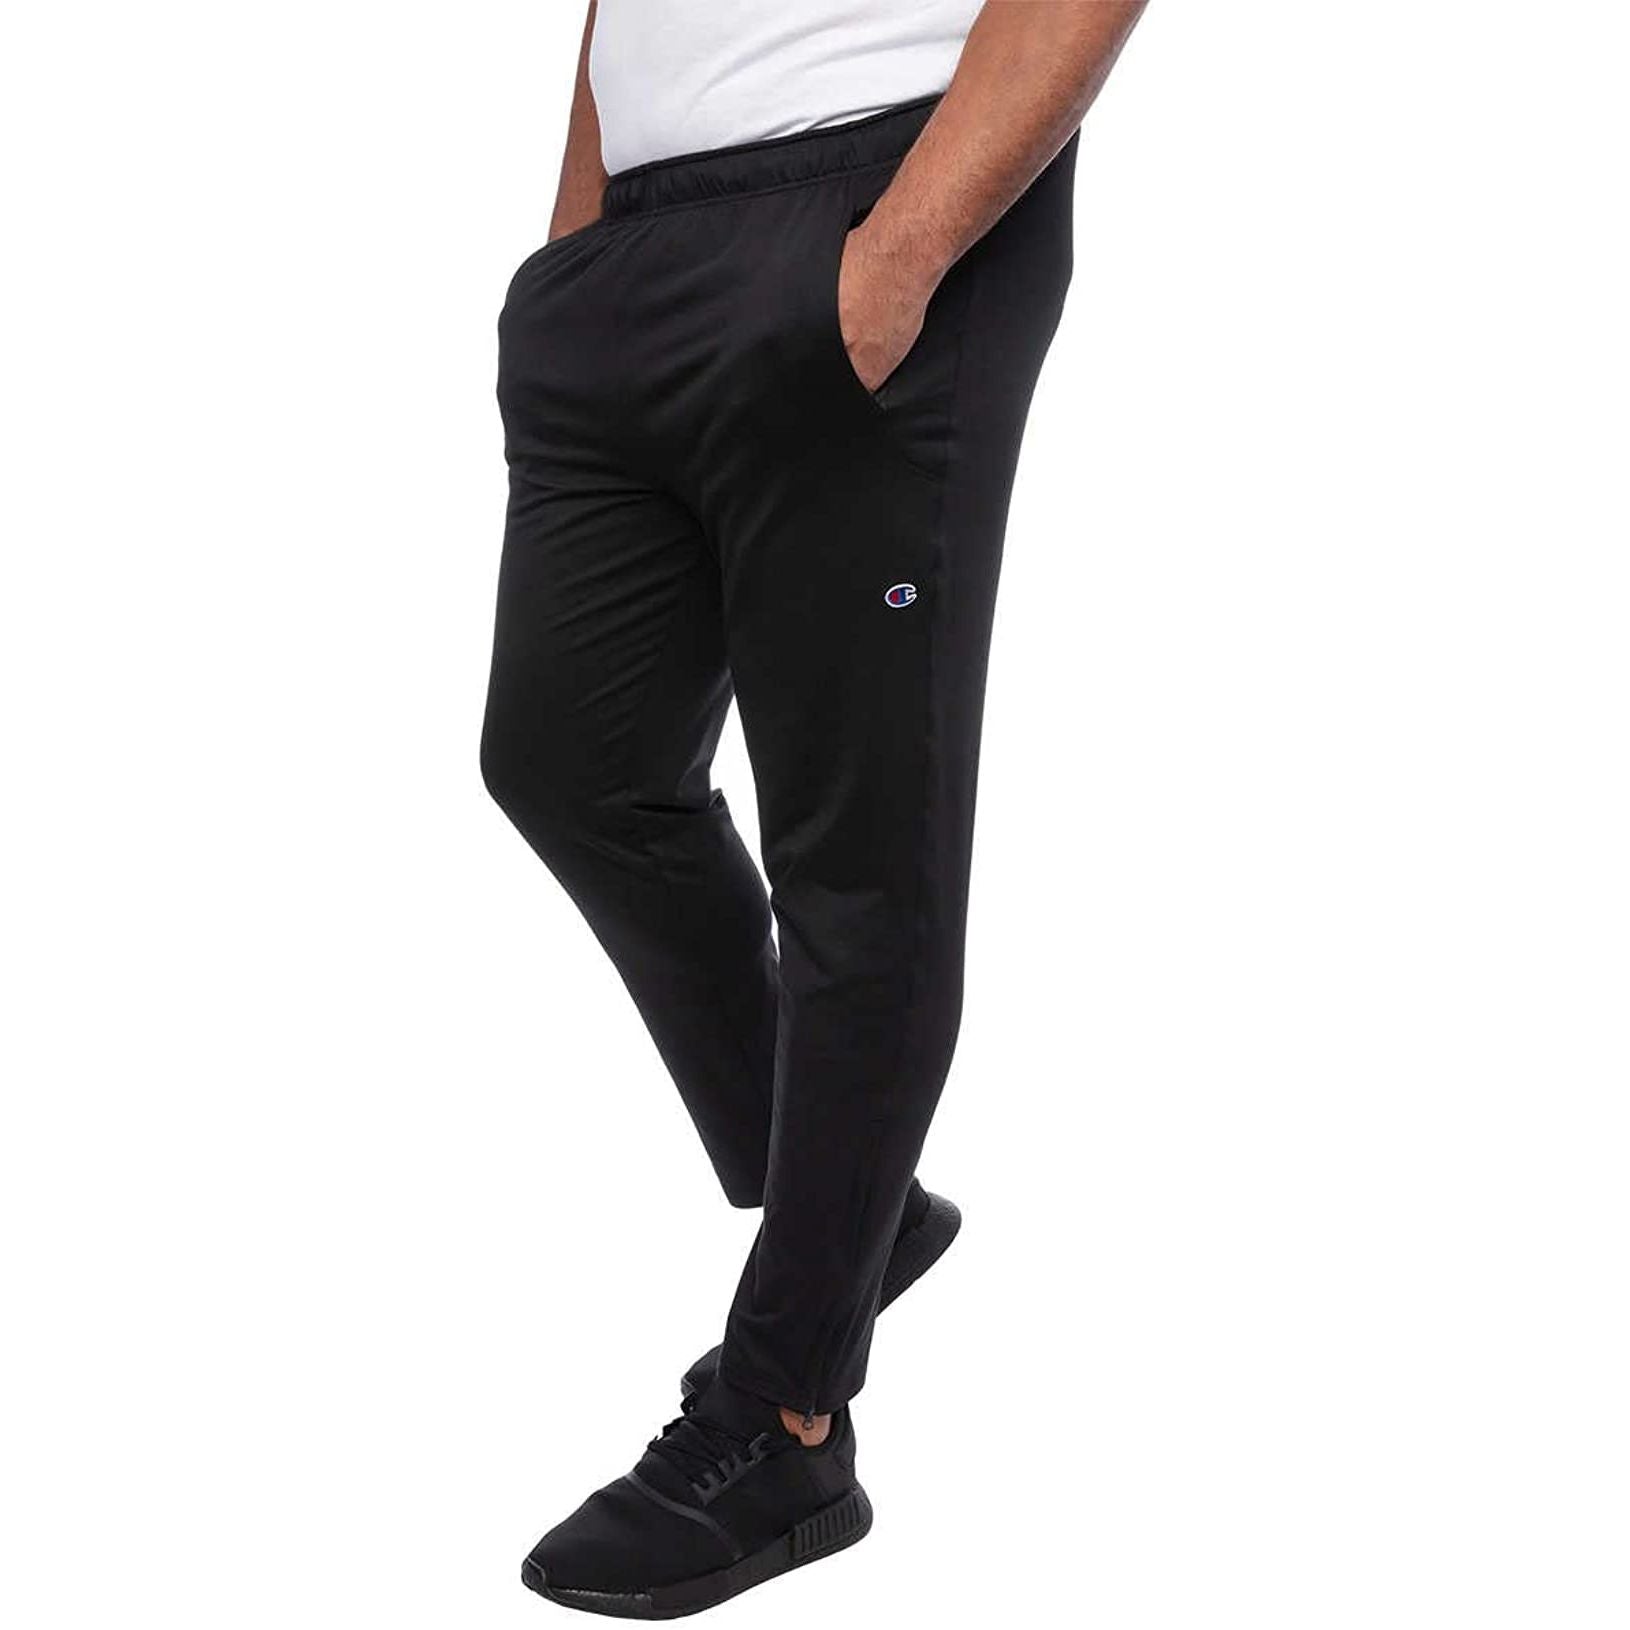 Champion Men's Cross Training Pant - High-performance athletic fit workout pant for ultimate comfort and durability.